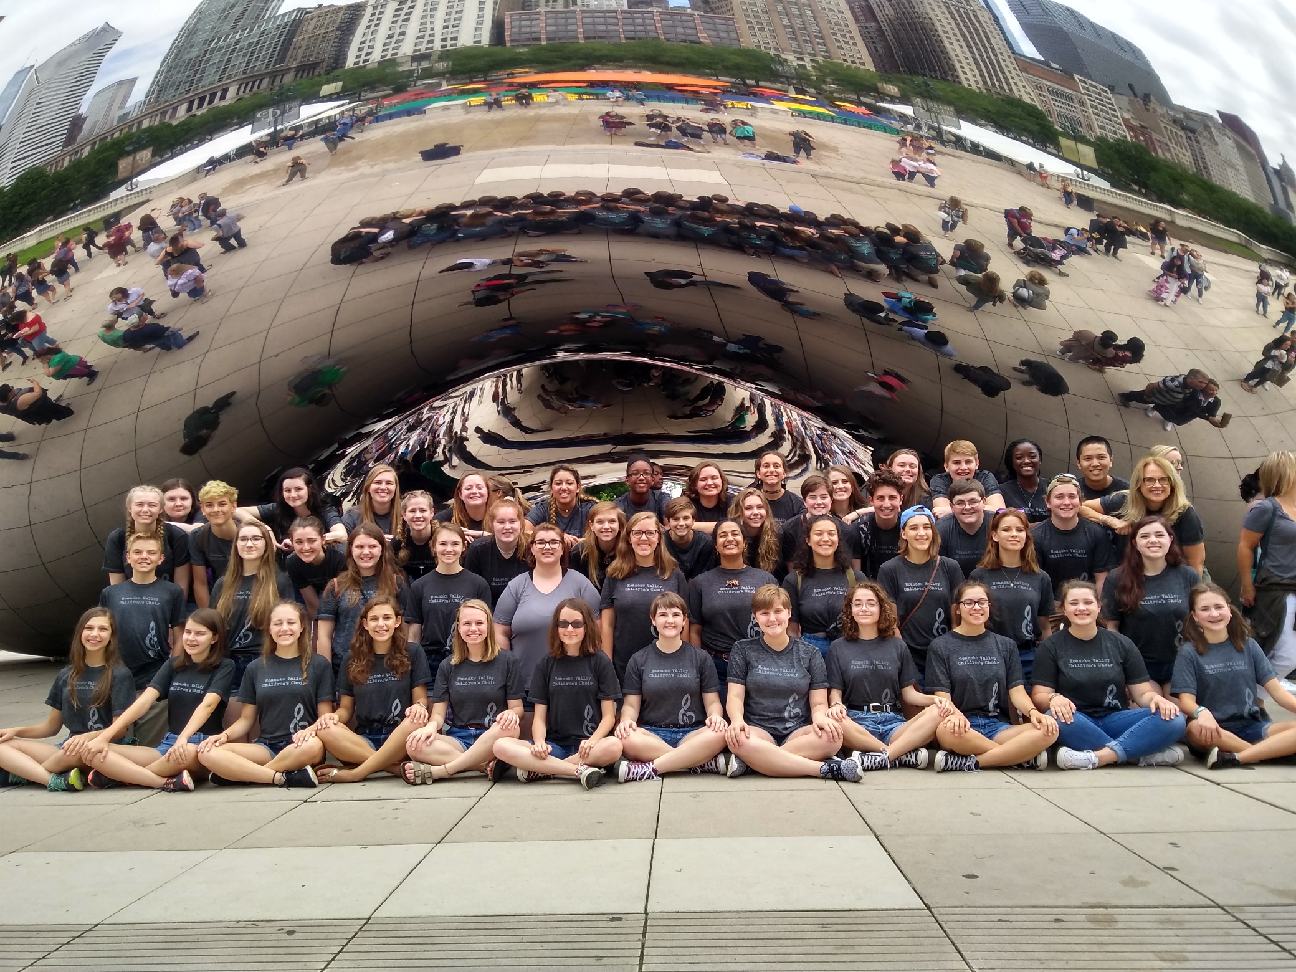 In front of the Chicago Bean